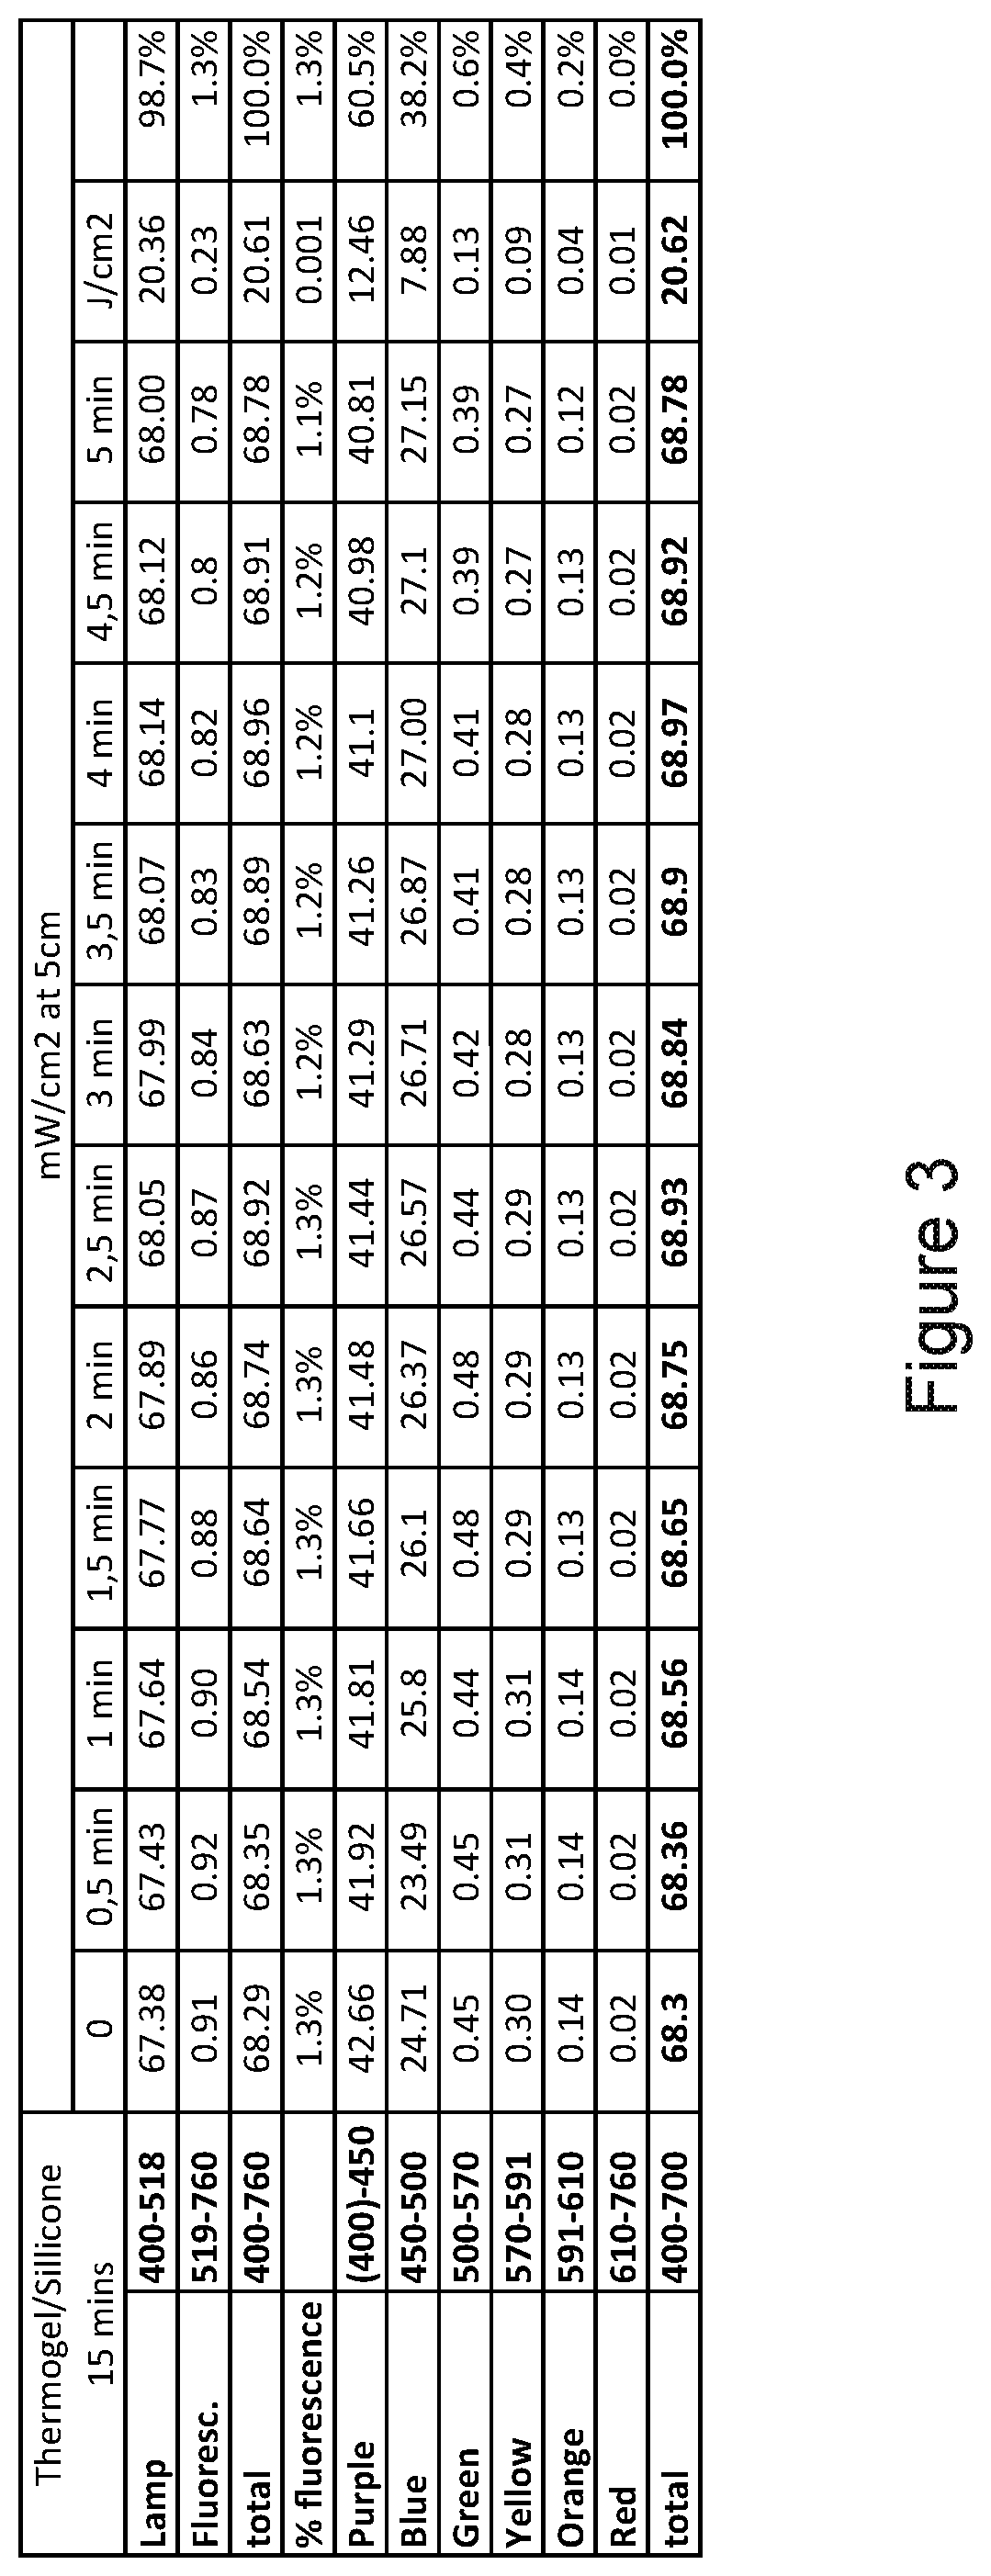 Silicone-based biophotonic compositions and uses thereof